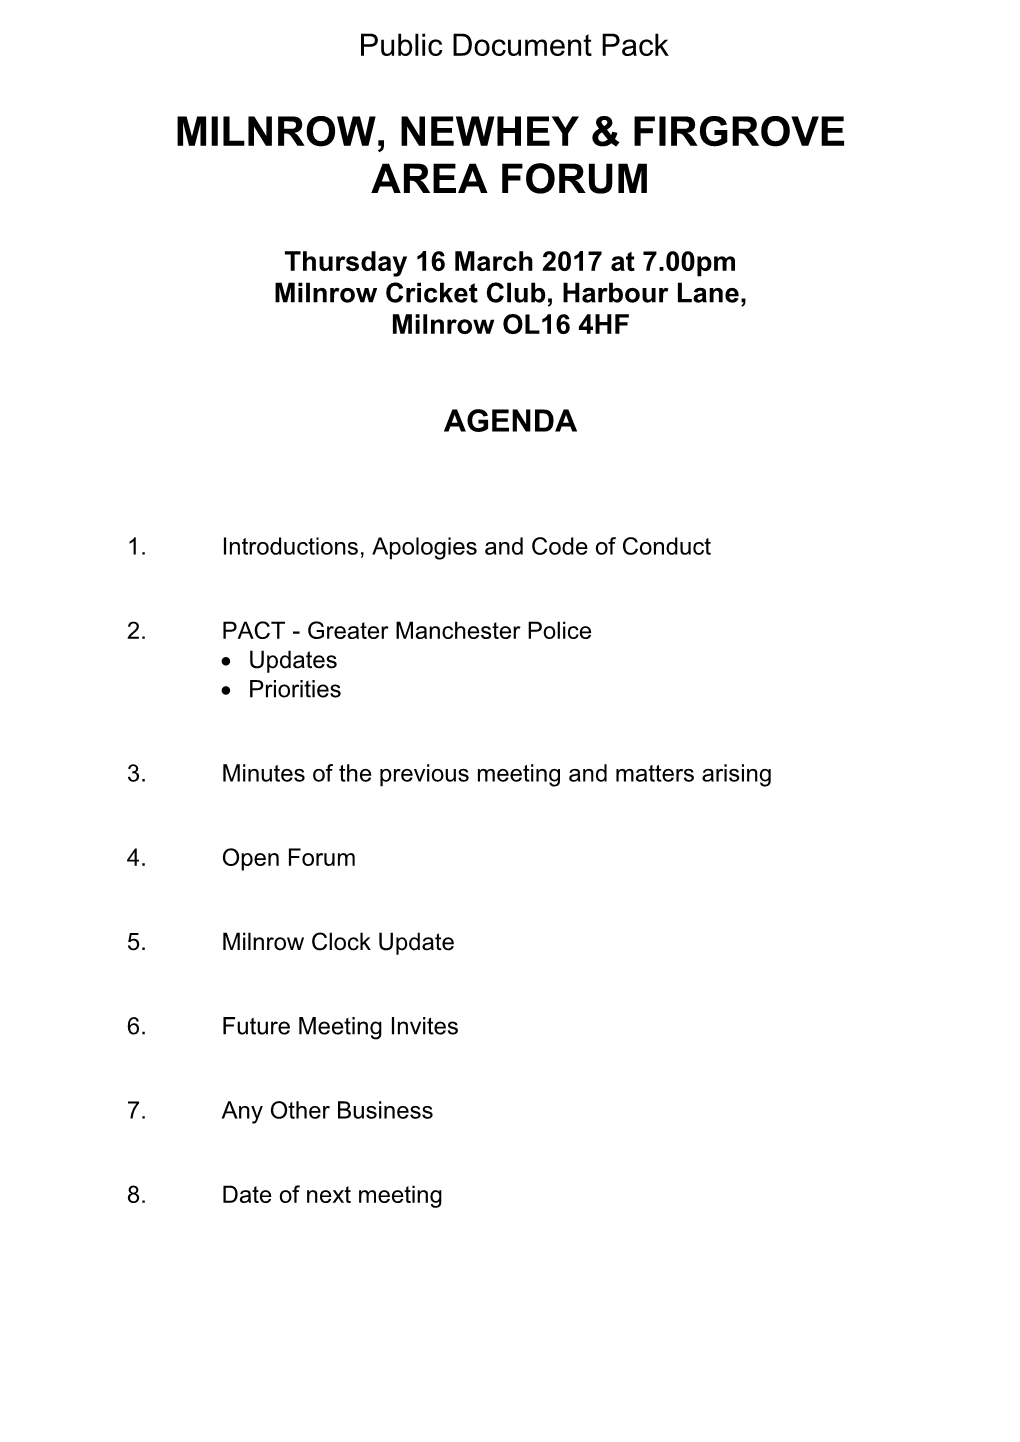 (Public Pack)Agenda Document for Milnrow, Newhey and Firgrove Area